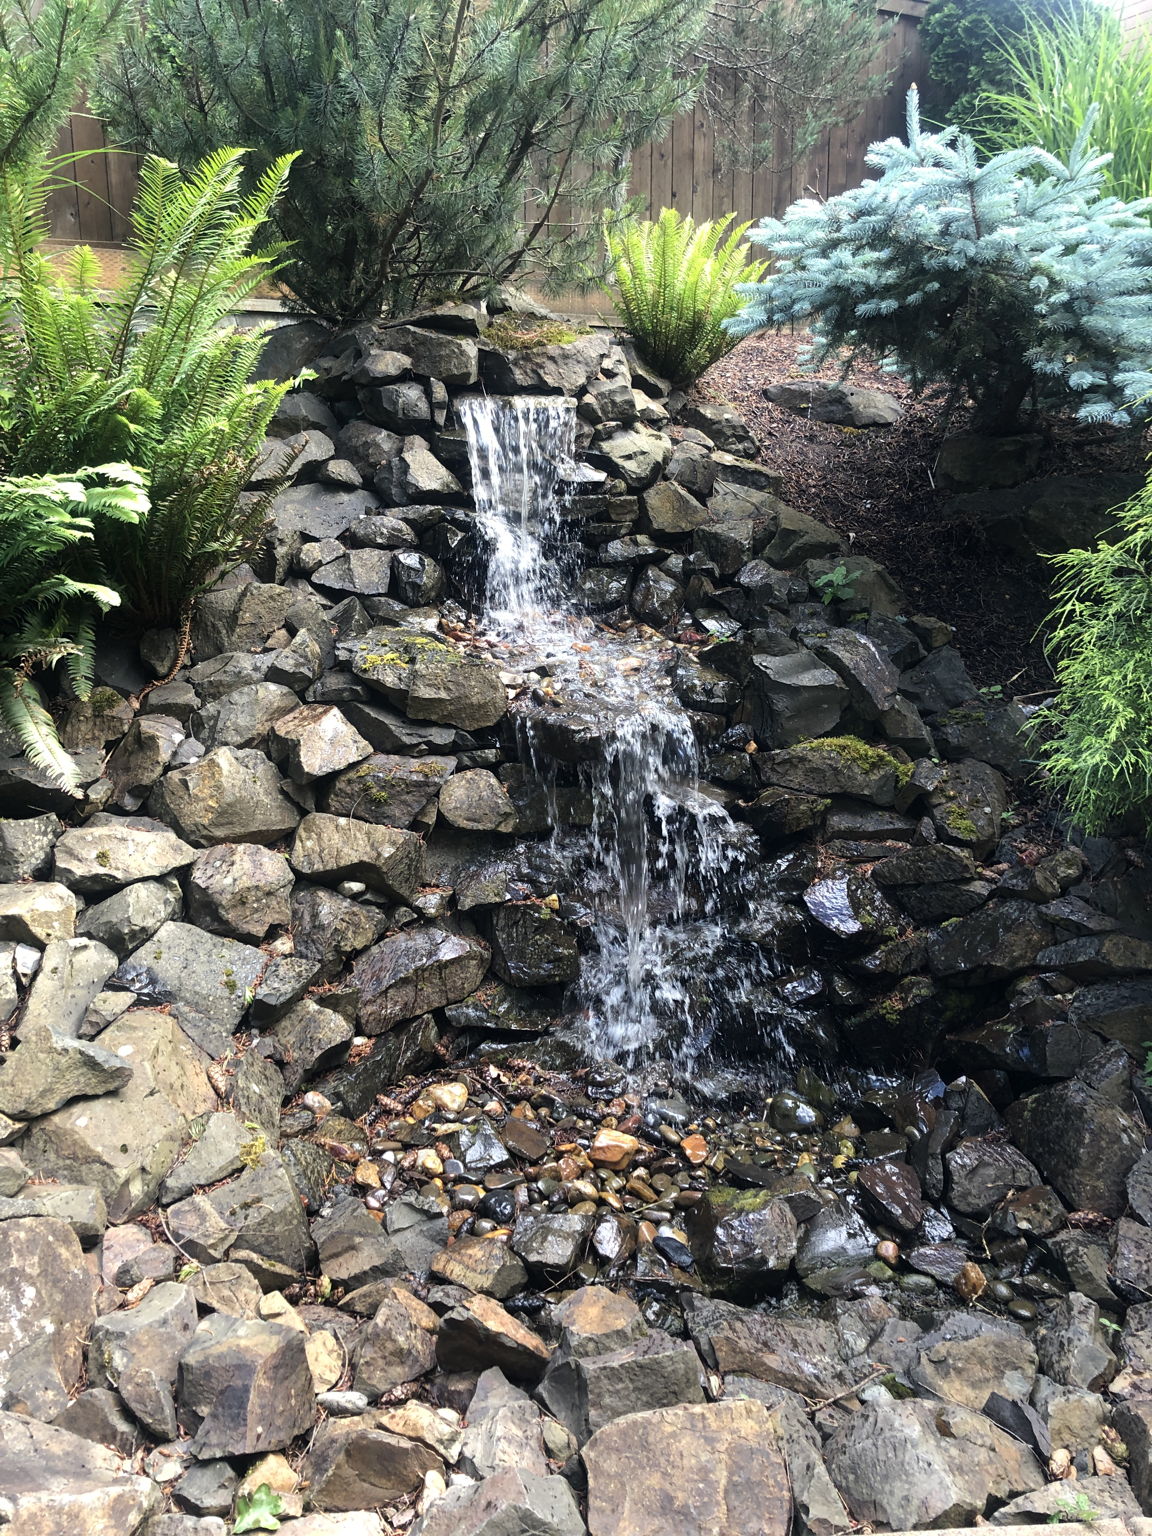 Water Feature